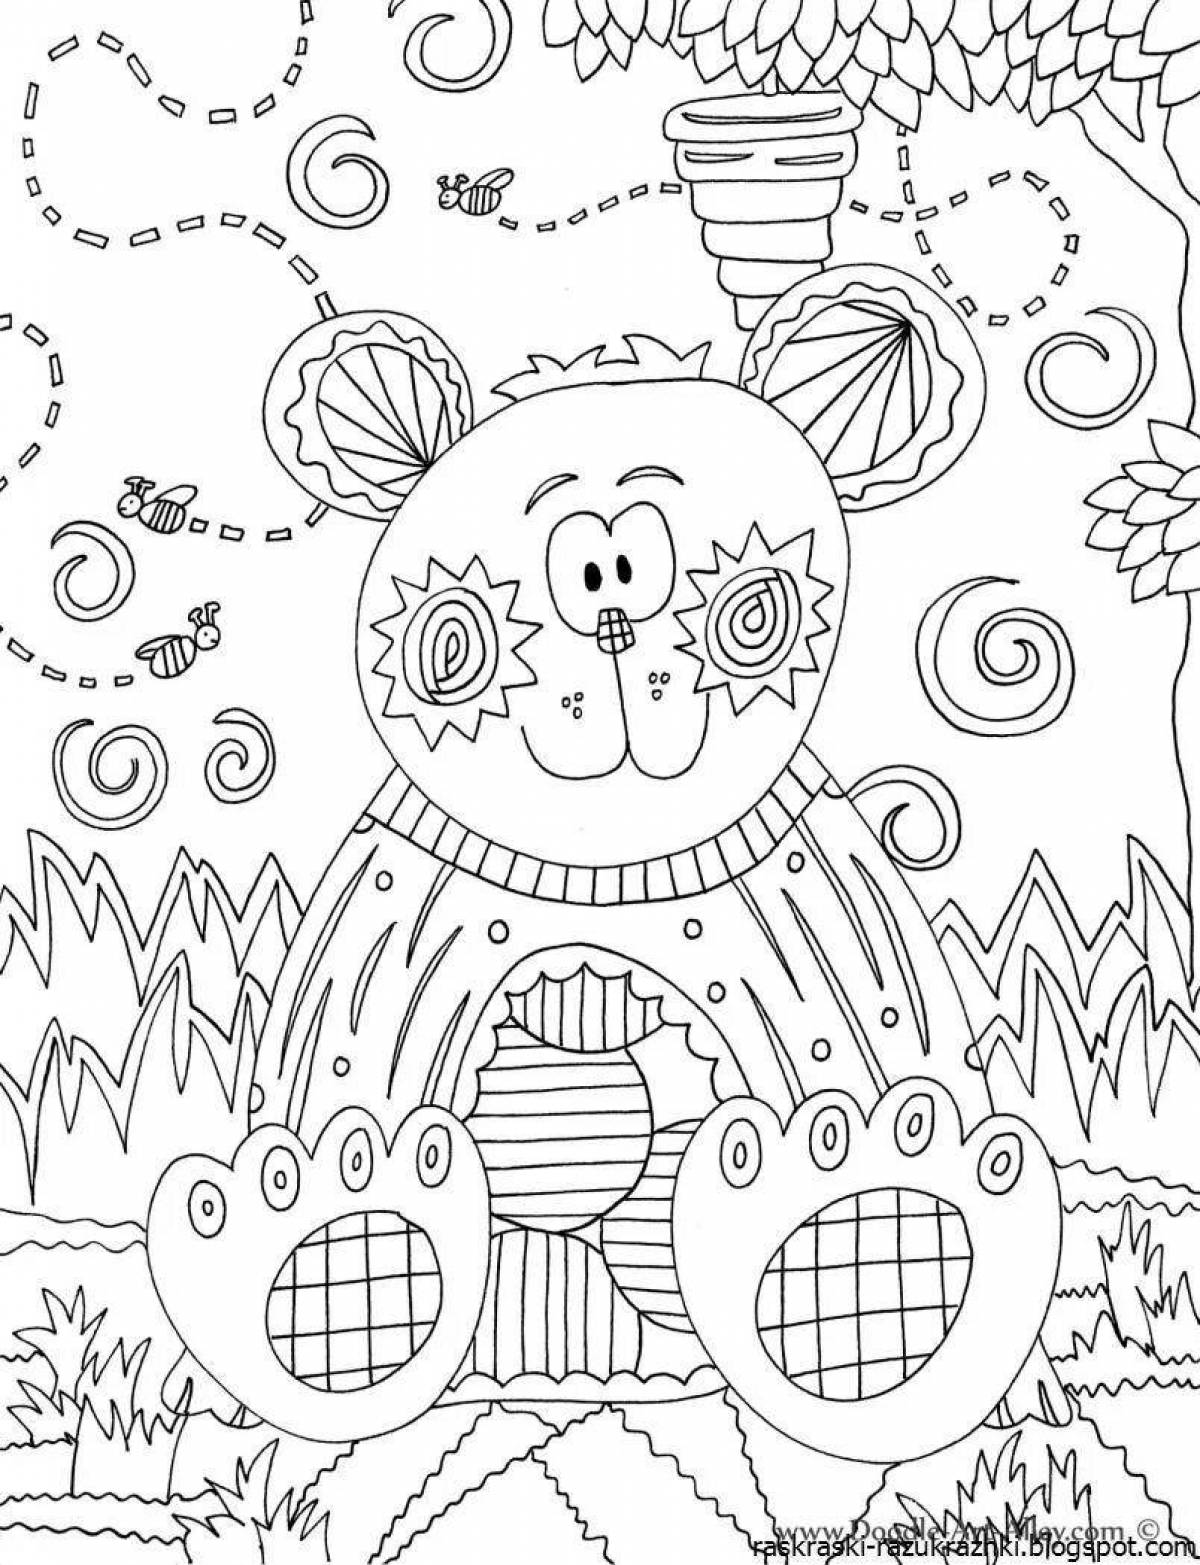 Fun coloring book with small details for boys